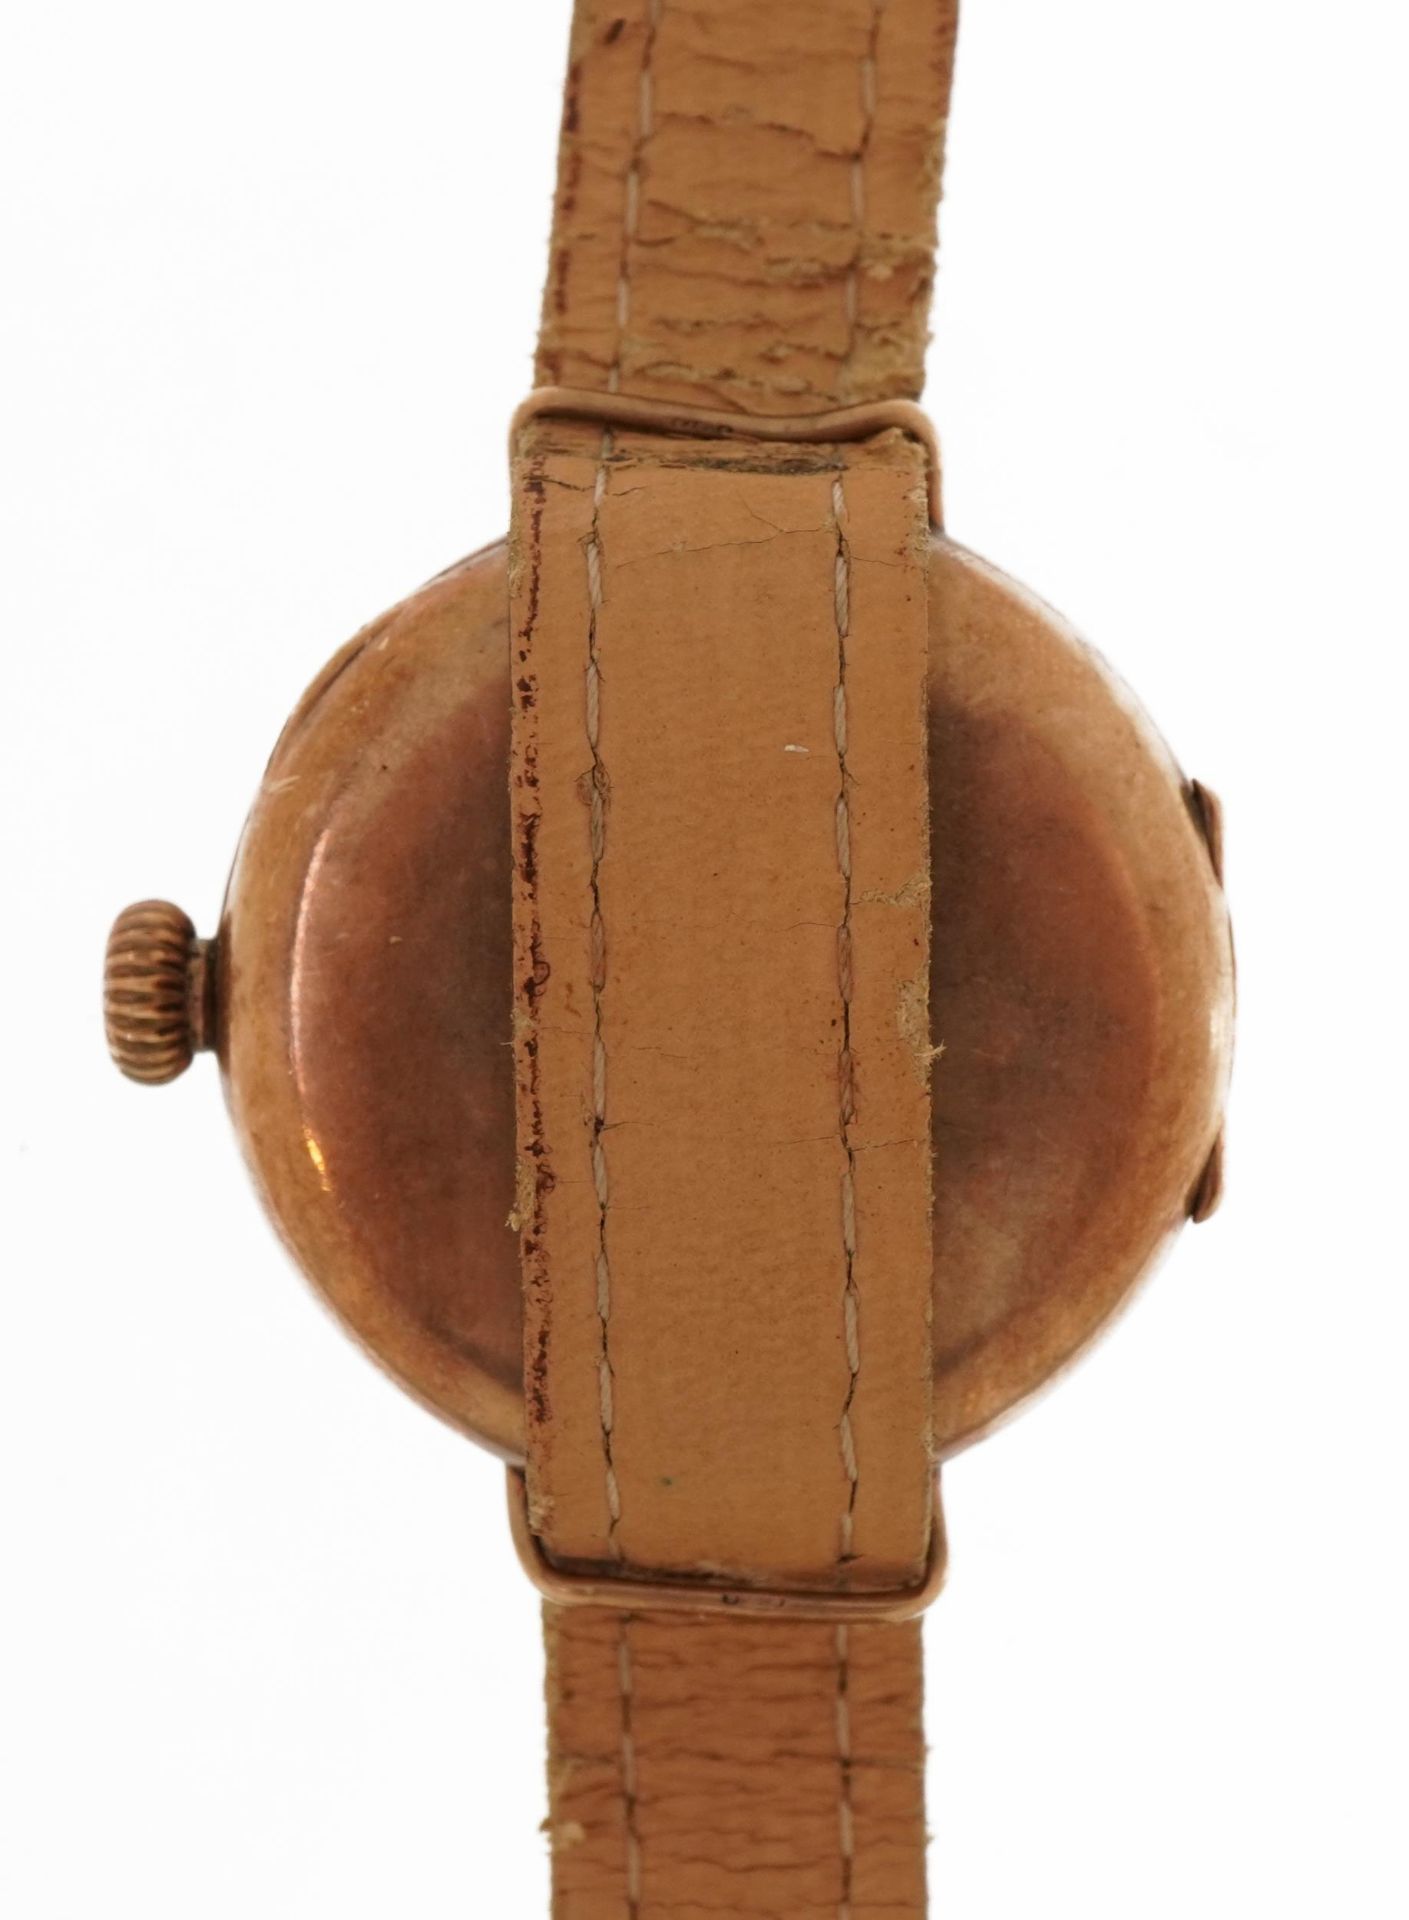 Waltham, gentlemen's 9ct gold trench wristwatch, 31.5mm in diameter : For further information on - Image 3 of 4